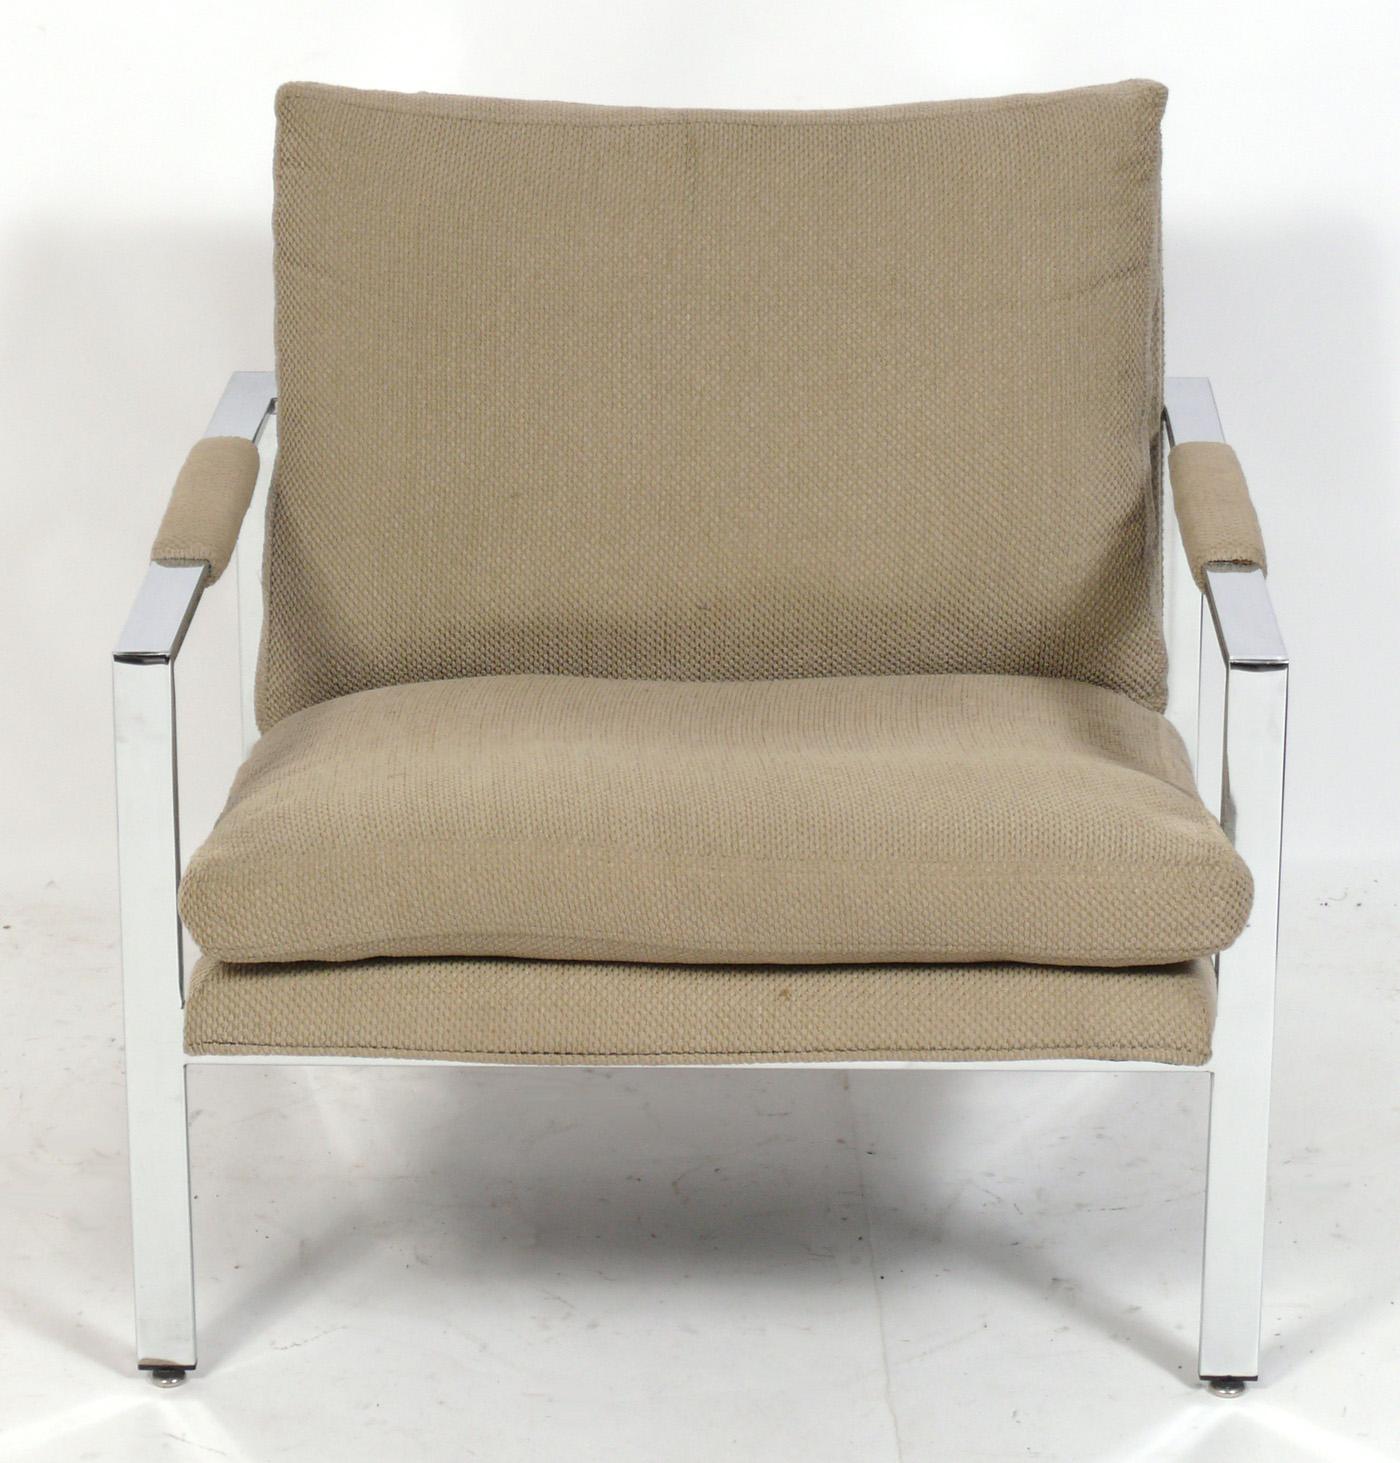 American Milo Baughman Pair of Chrome Lounge Chairs Reupholstered In Your Fabric For Sale